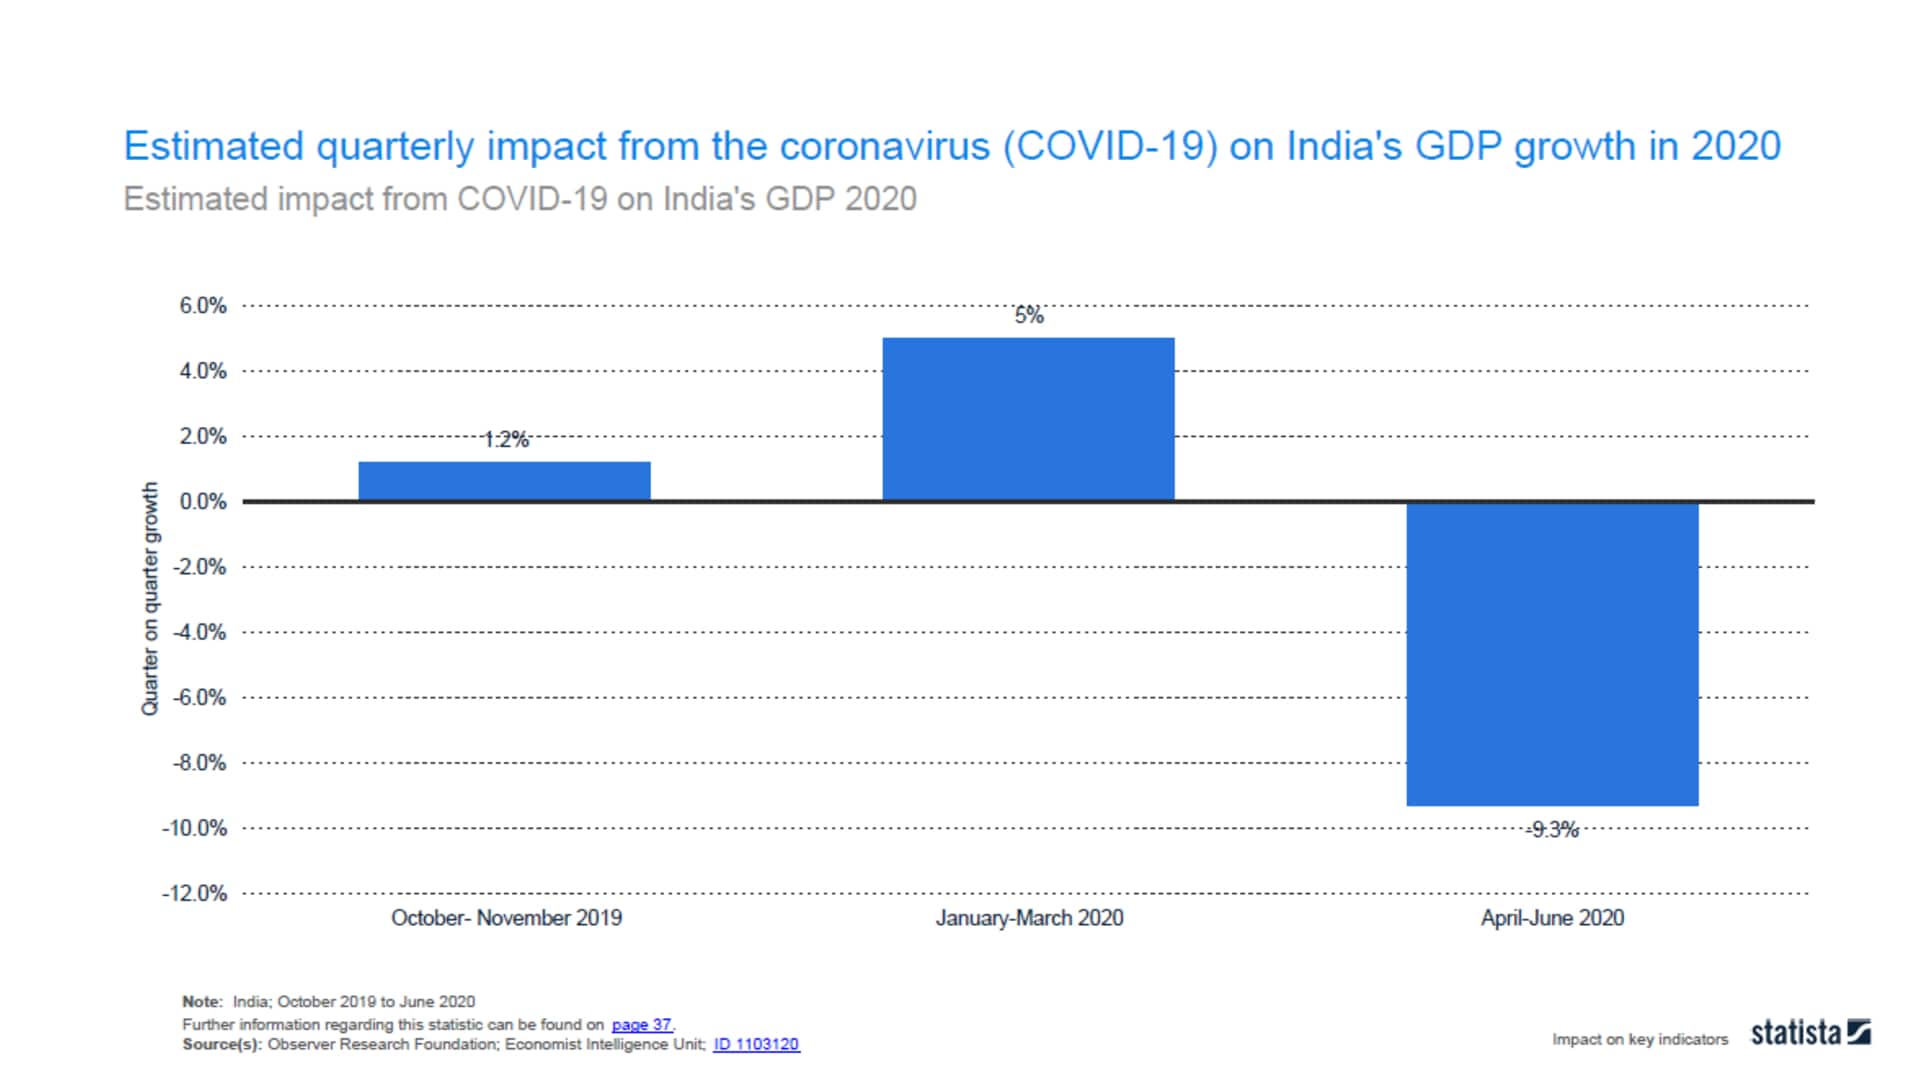 https://images.moneycontrol.com/static-mcnews/2020/05/1.-Estimated-quarterly-impact-from-the-coronavirus-COVID-19-on-Indias-GDP-growth-in-2020.jpg